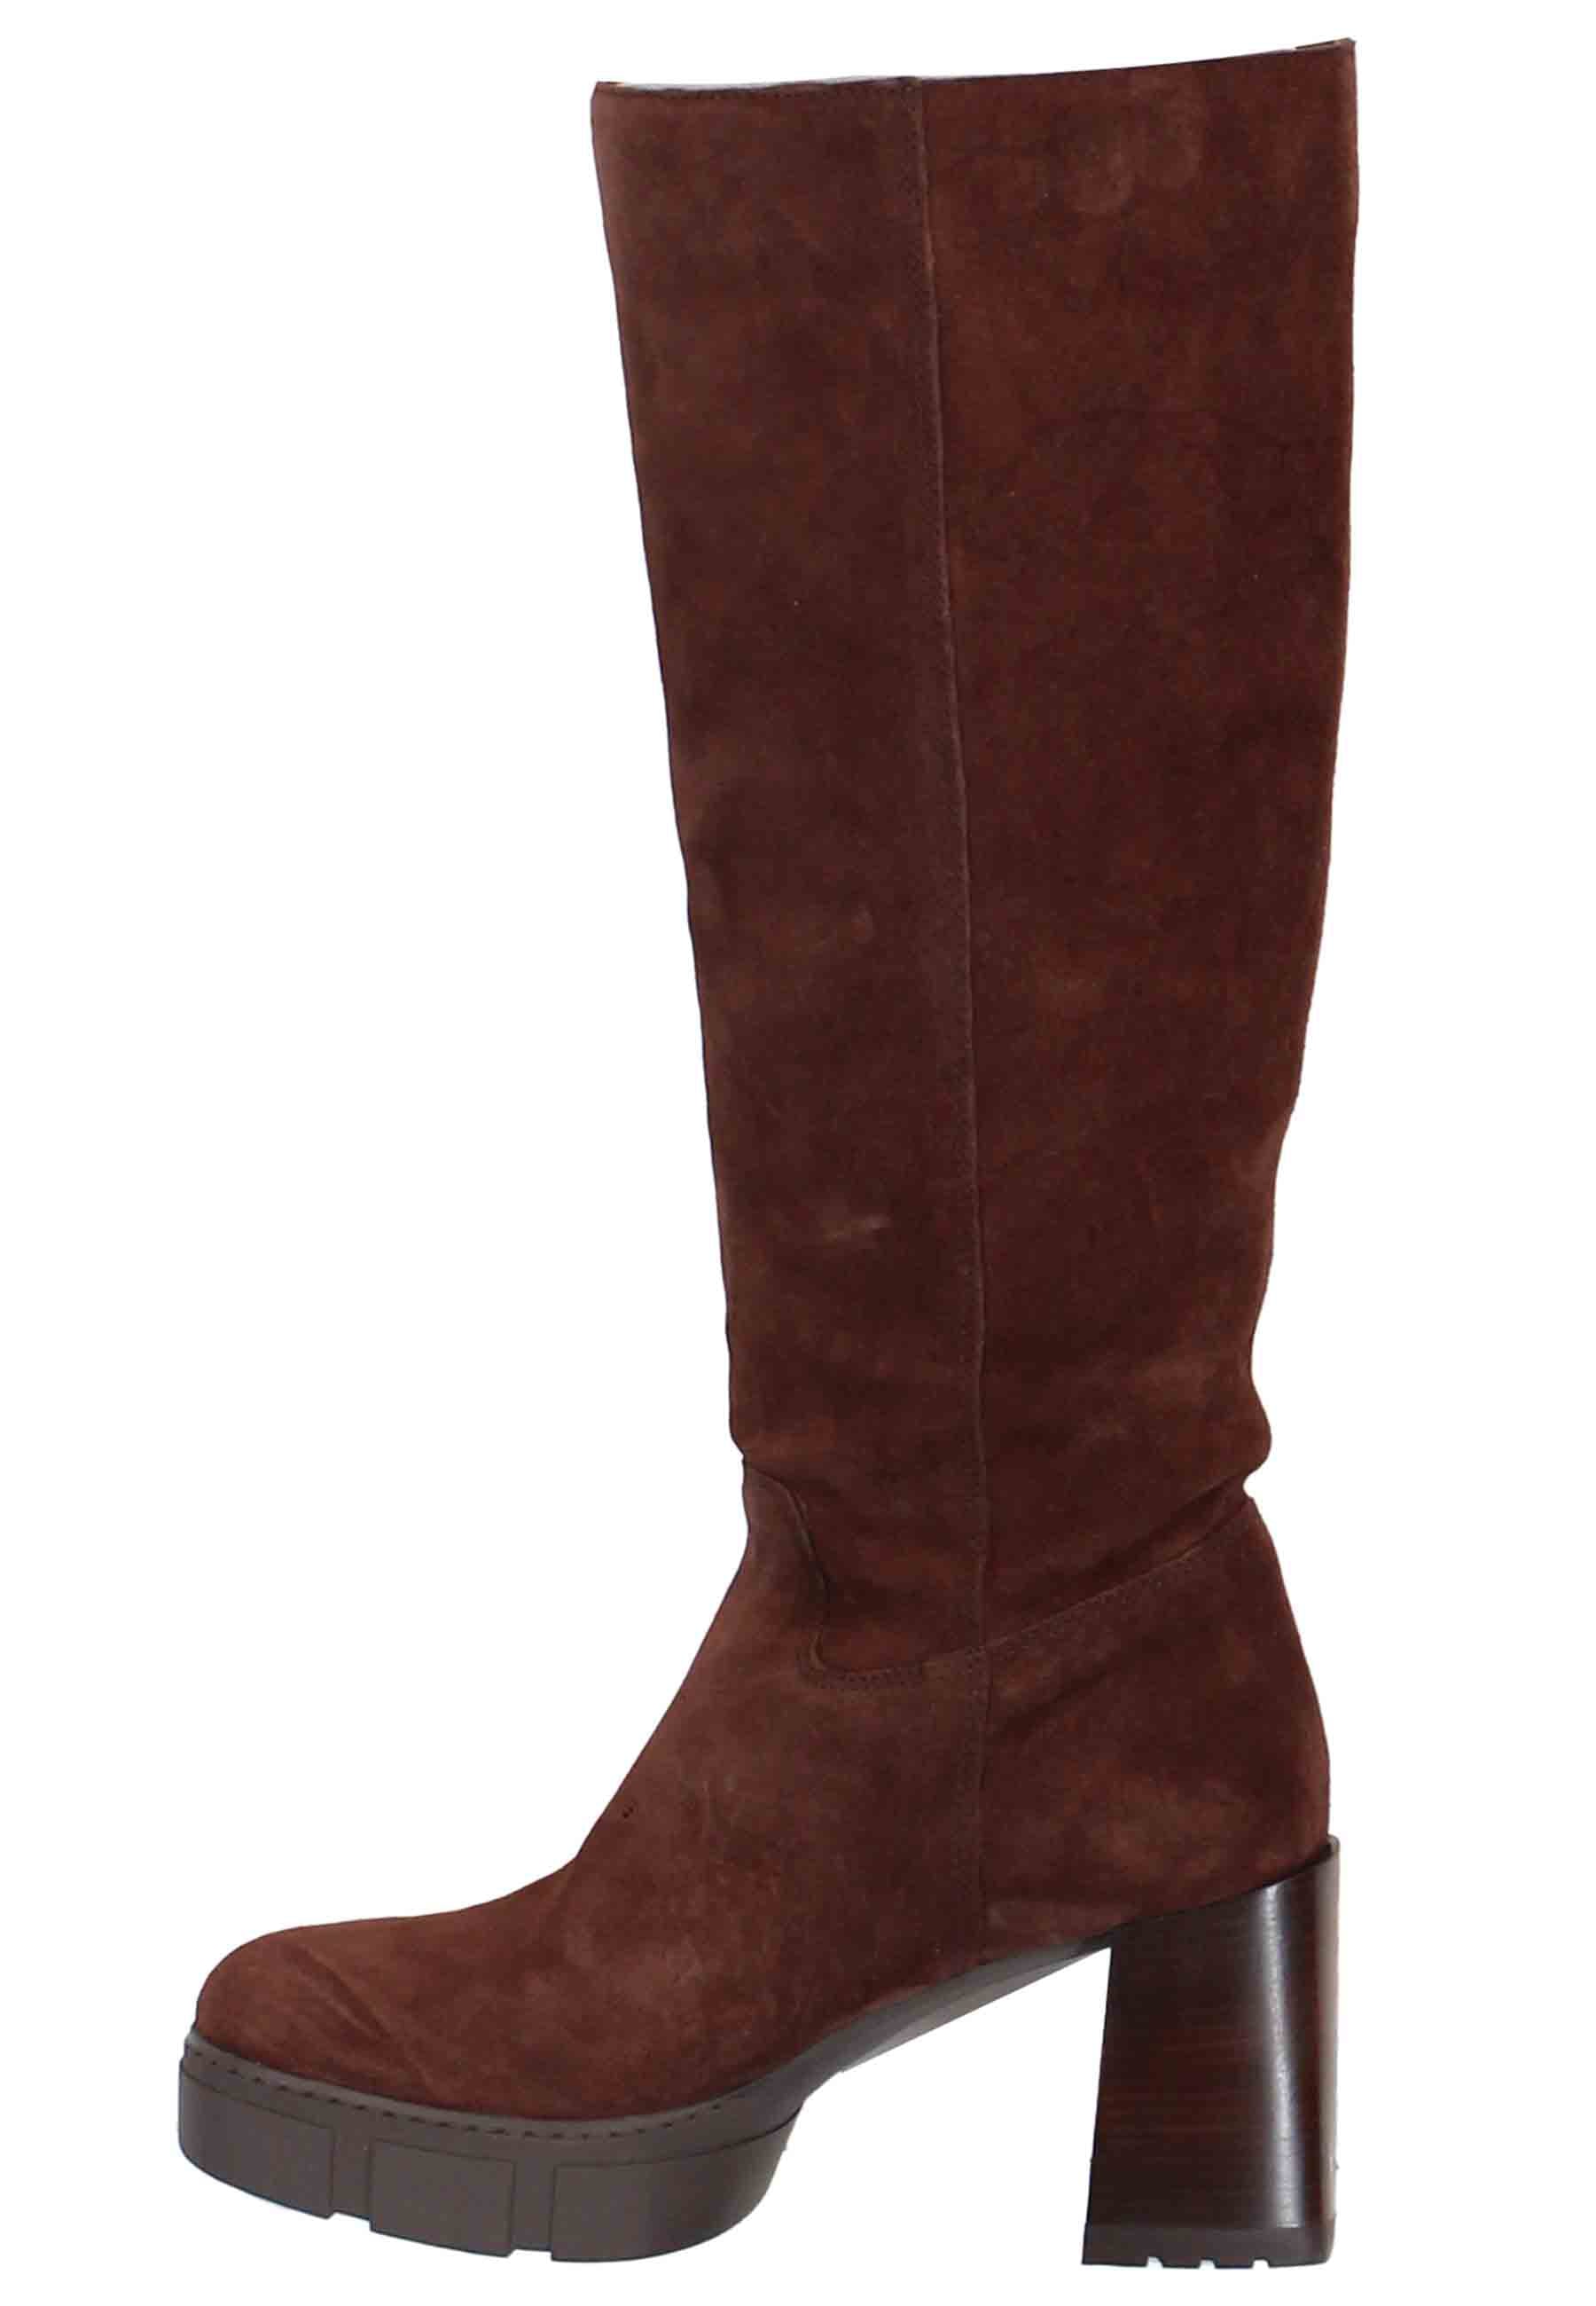 Women's tube boots in brown suede with heel and platform